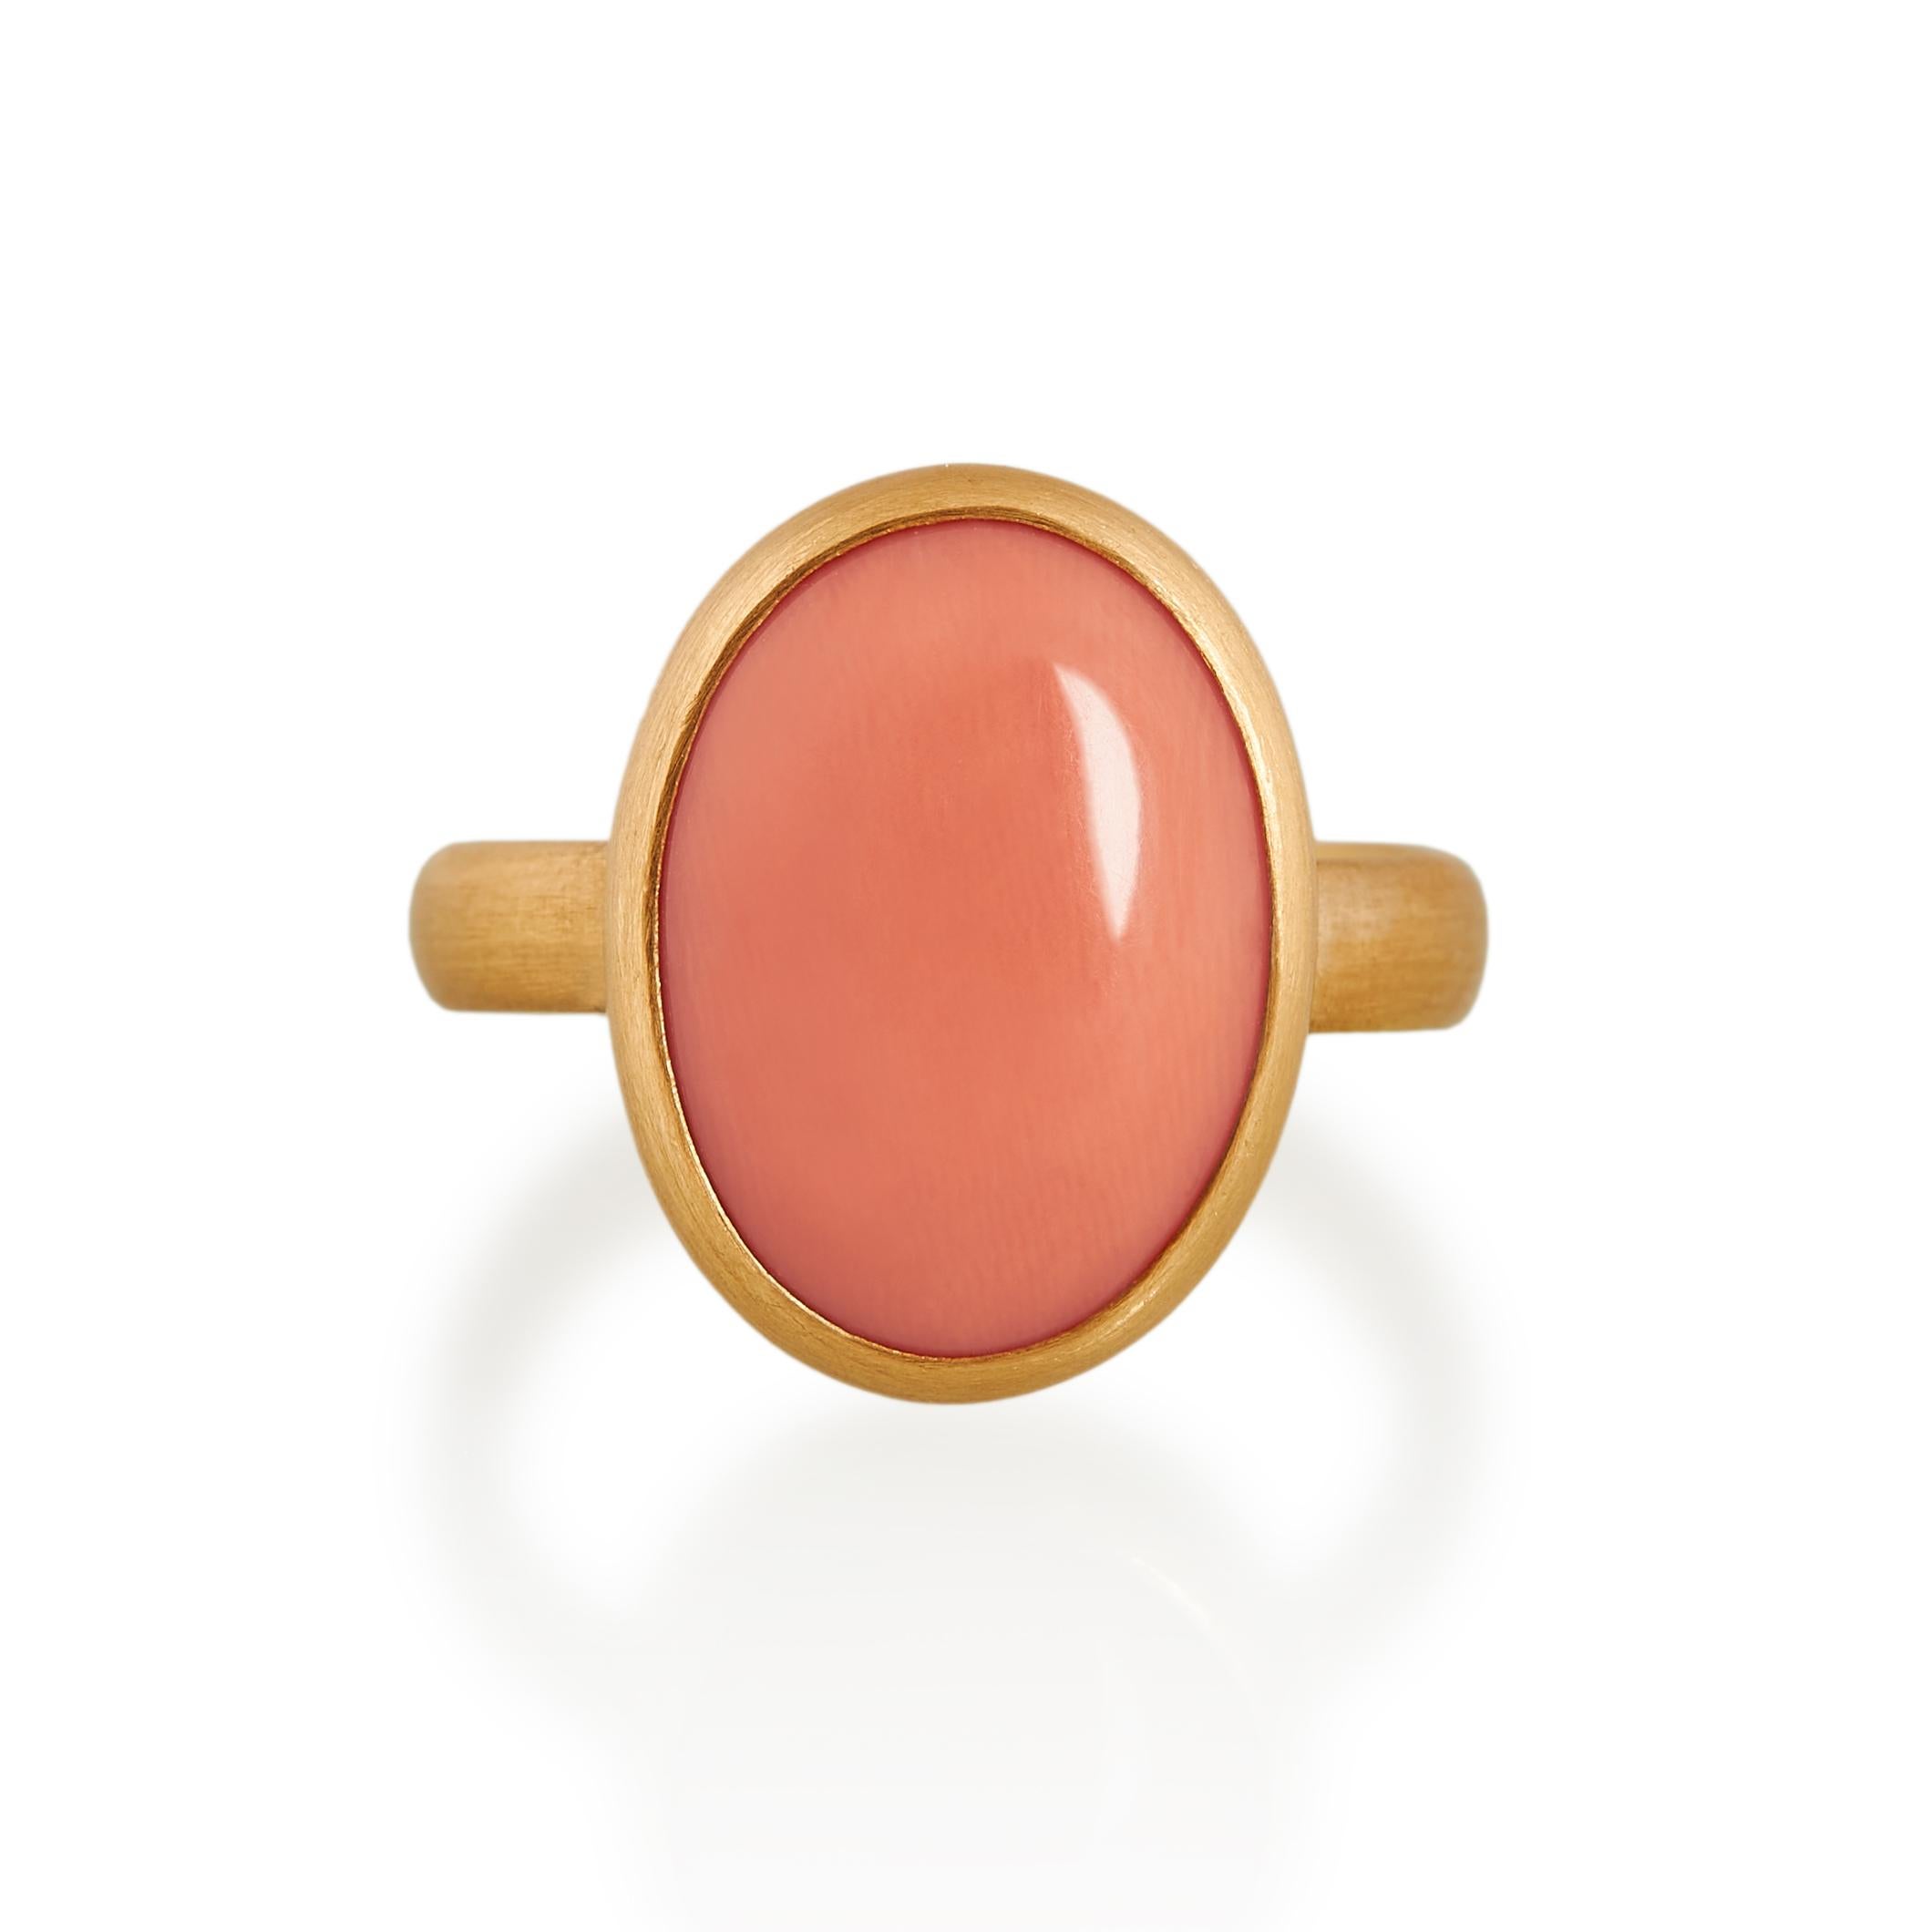 Antique oval cabochon cut coral ring with a wonderful peachy colour. Set in matte finished 22ct gold with a fine platinum inlay on the underside of the stone setting. 
Ref: G20005

8.41cts (18mm x 14mm) oval antique coral
22ct gold with platinum